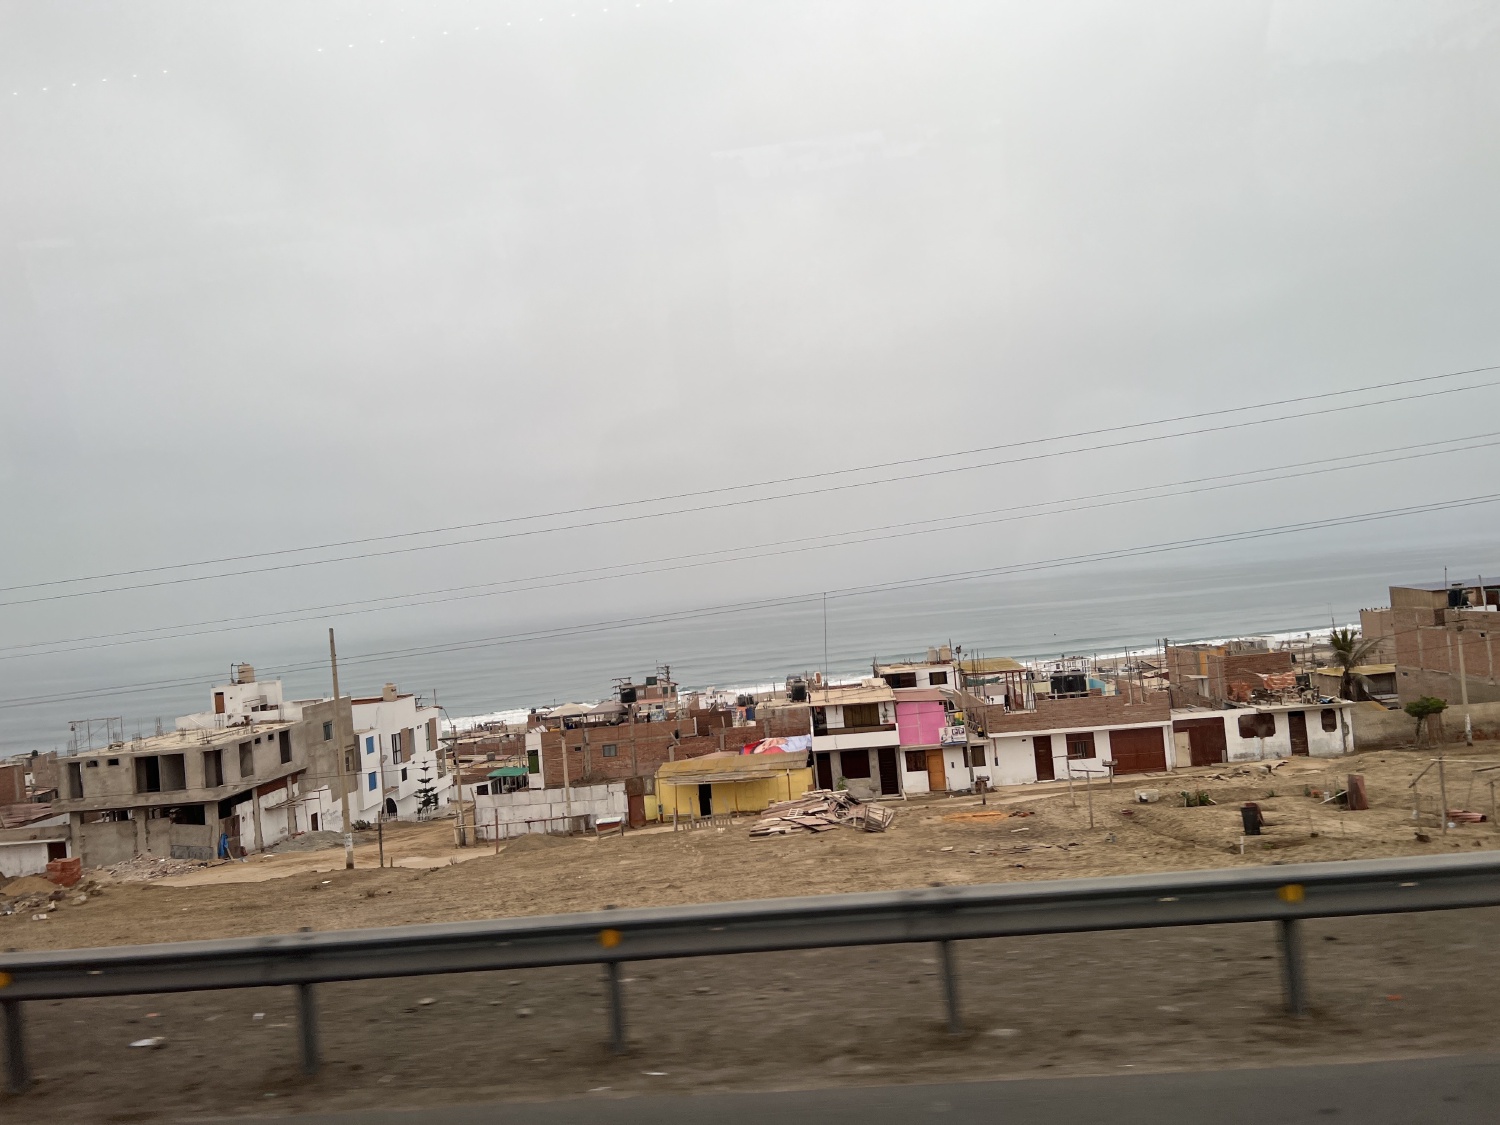 The bus ride from Lima to our first stop in Paracas took 3 hours. It's nice to see totally different, but similar terrains.